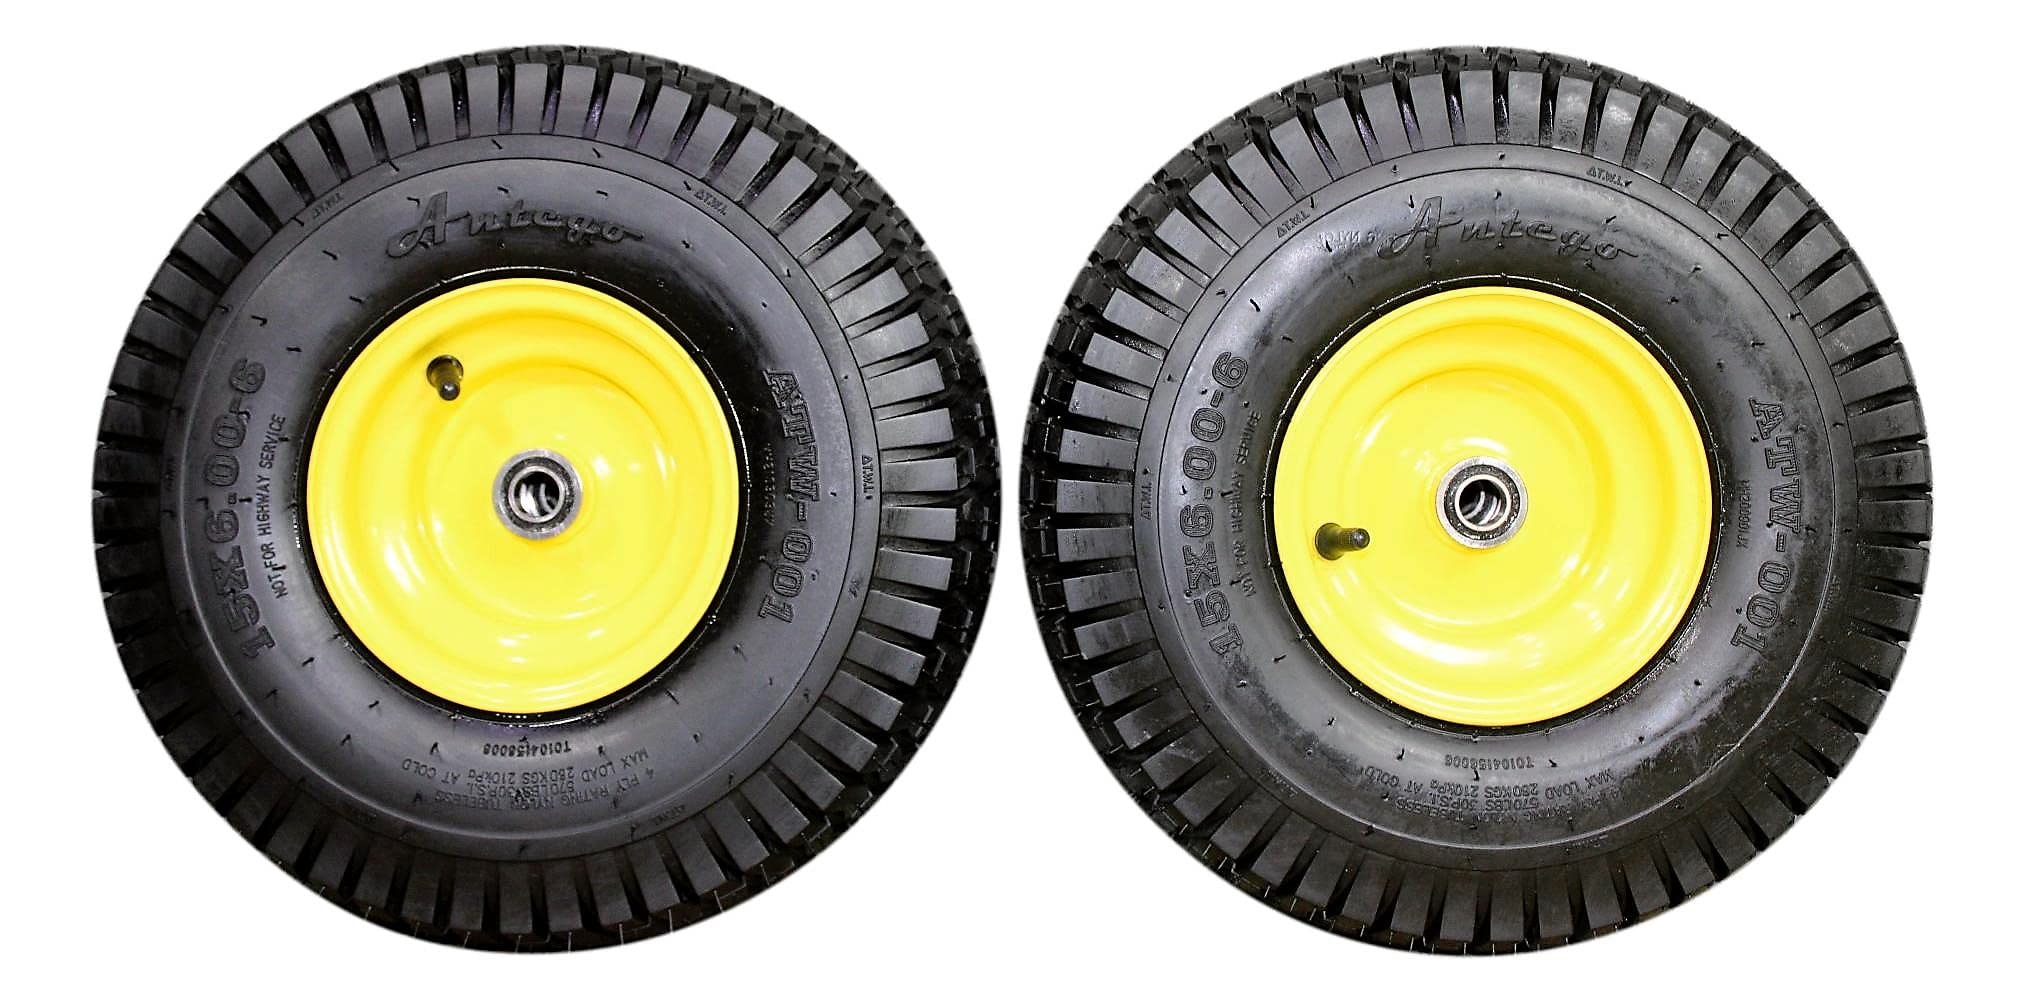 Enhance Your Equipment with the John Deere 15×6 00 6 Tire and Rim Combo